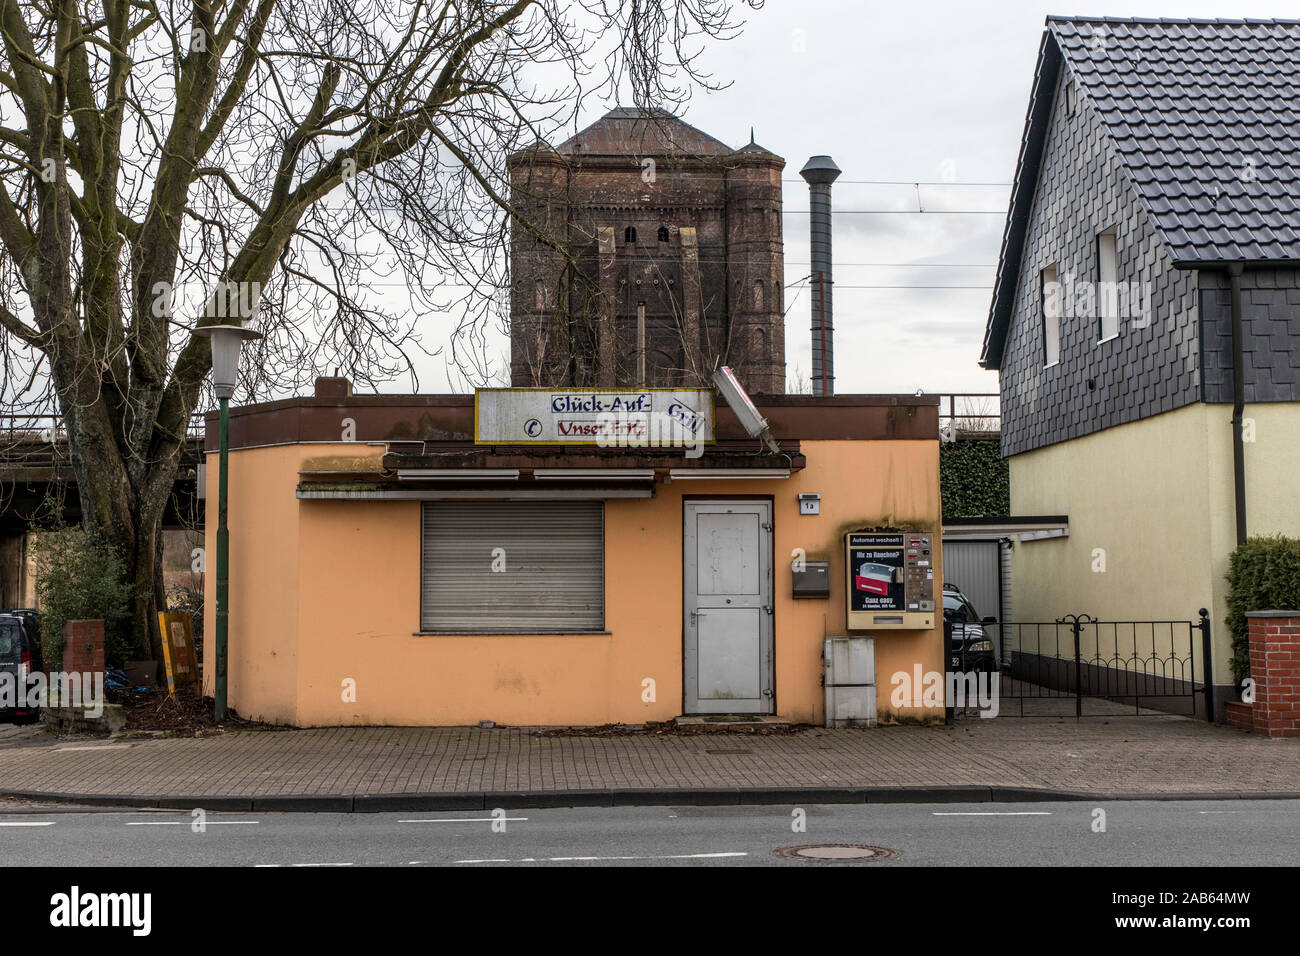 Malakow tower of the former Unser Fritz colliery, shaft 1/4, in Herne, closed Glück-Auf Unser Fritz snack bar on Schloss Street, Stock Photo